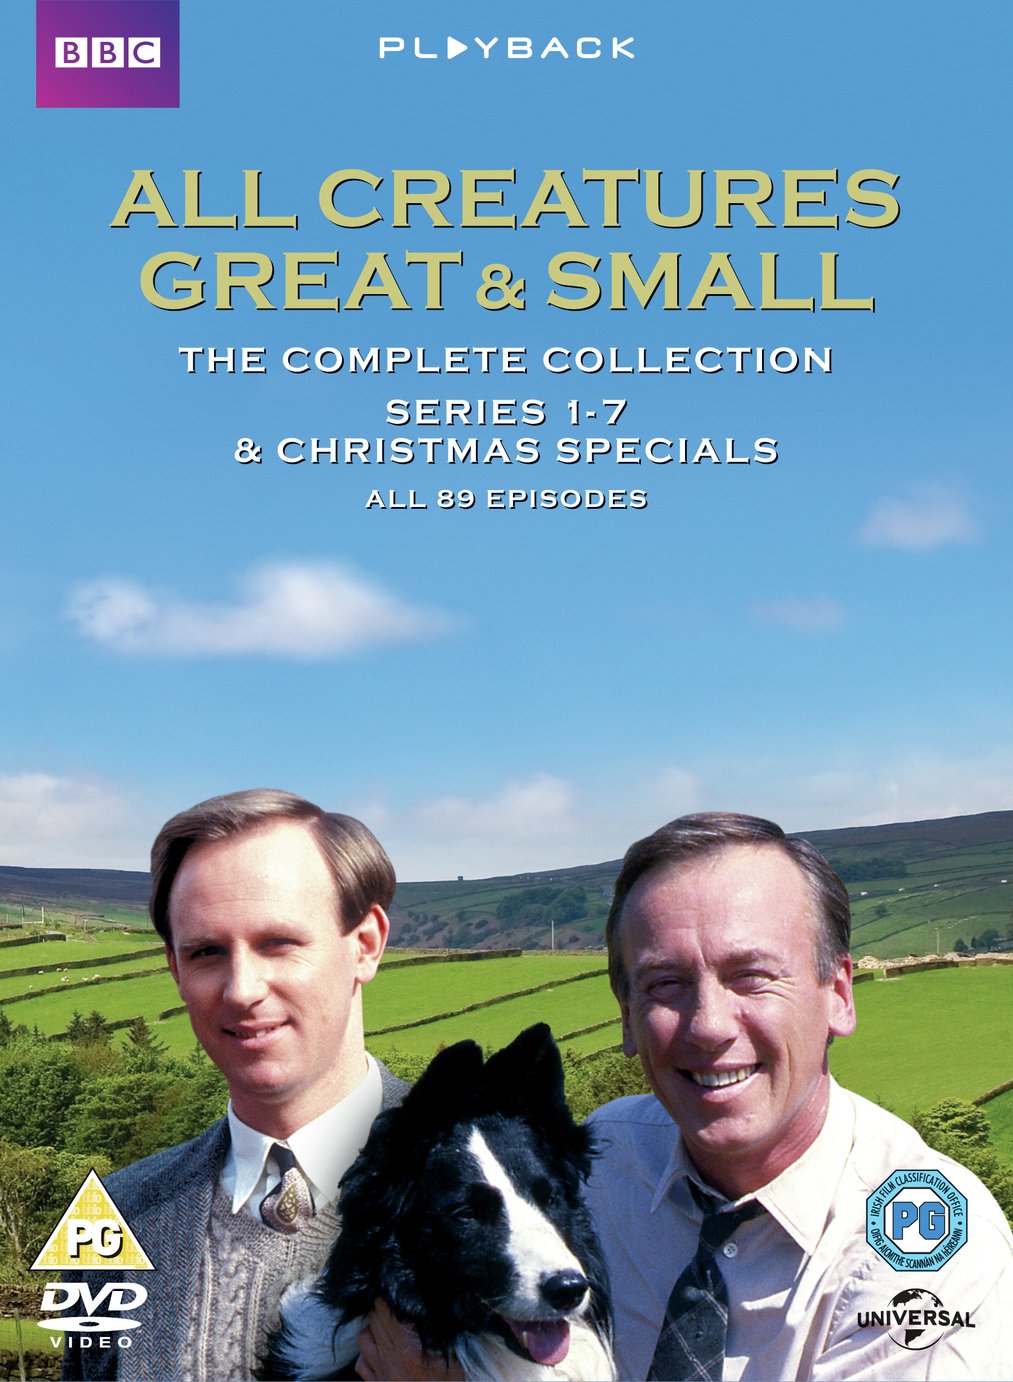 All Creatures Great and Small Complete DVD Box Set Review